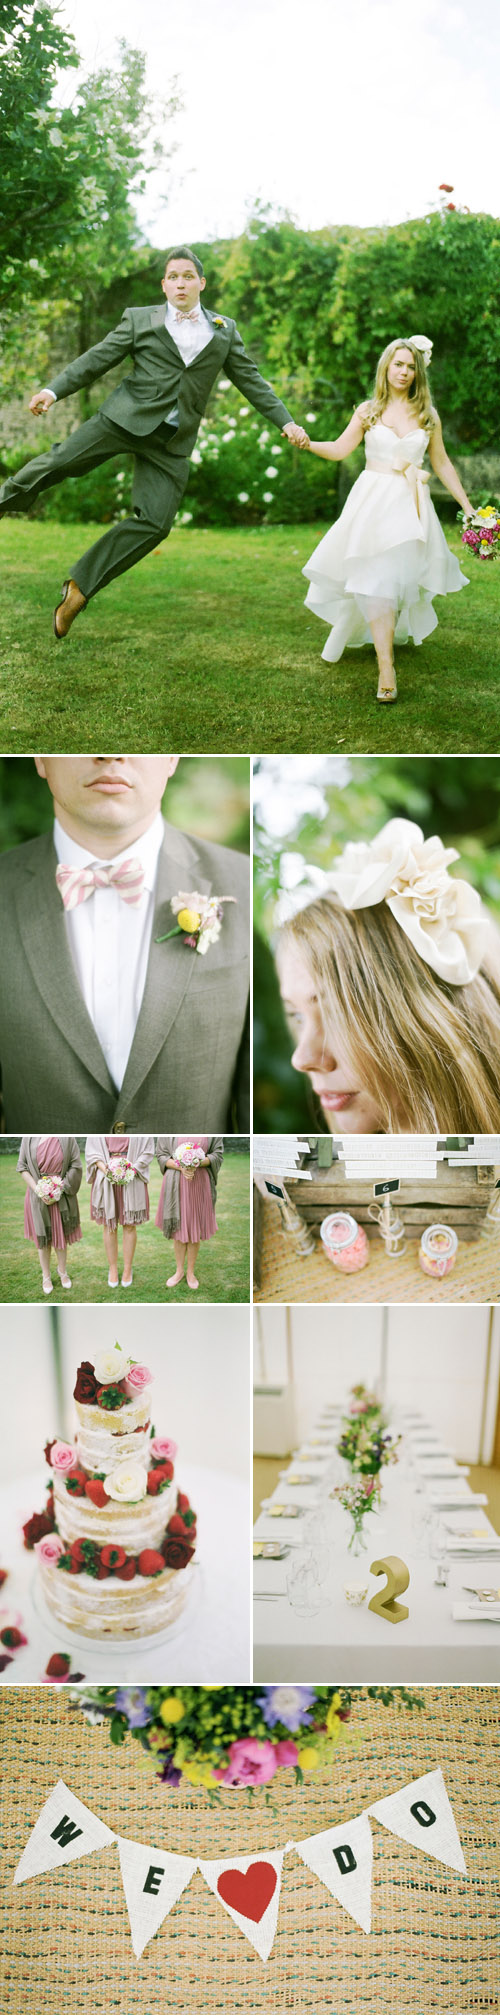 vintage English countryside wedding from Rock n Roll Bride blog, photos by Ashton Jean-Pierre